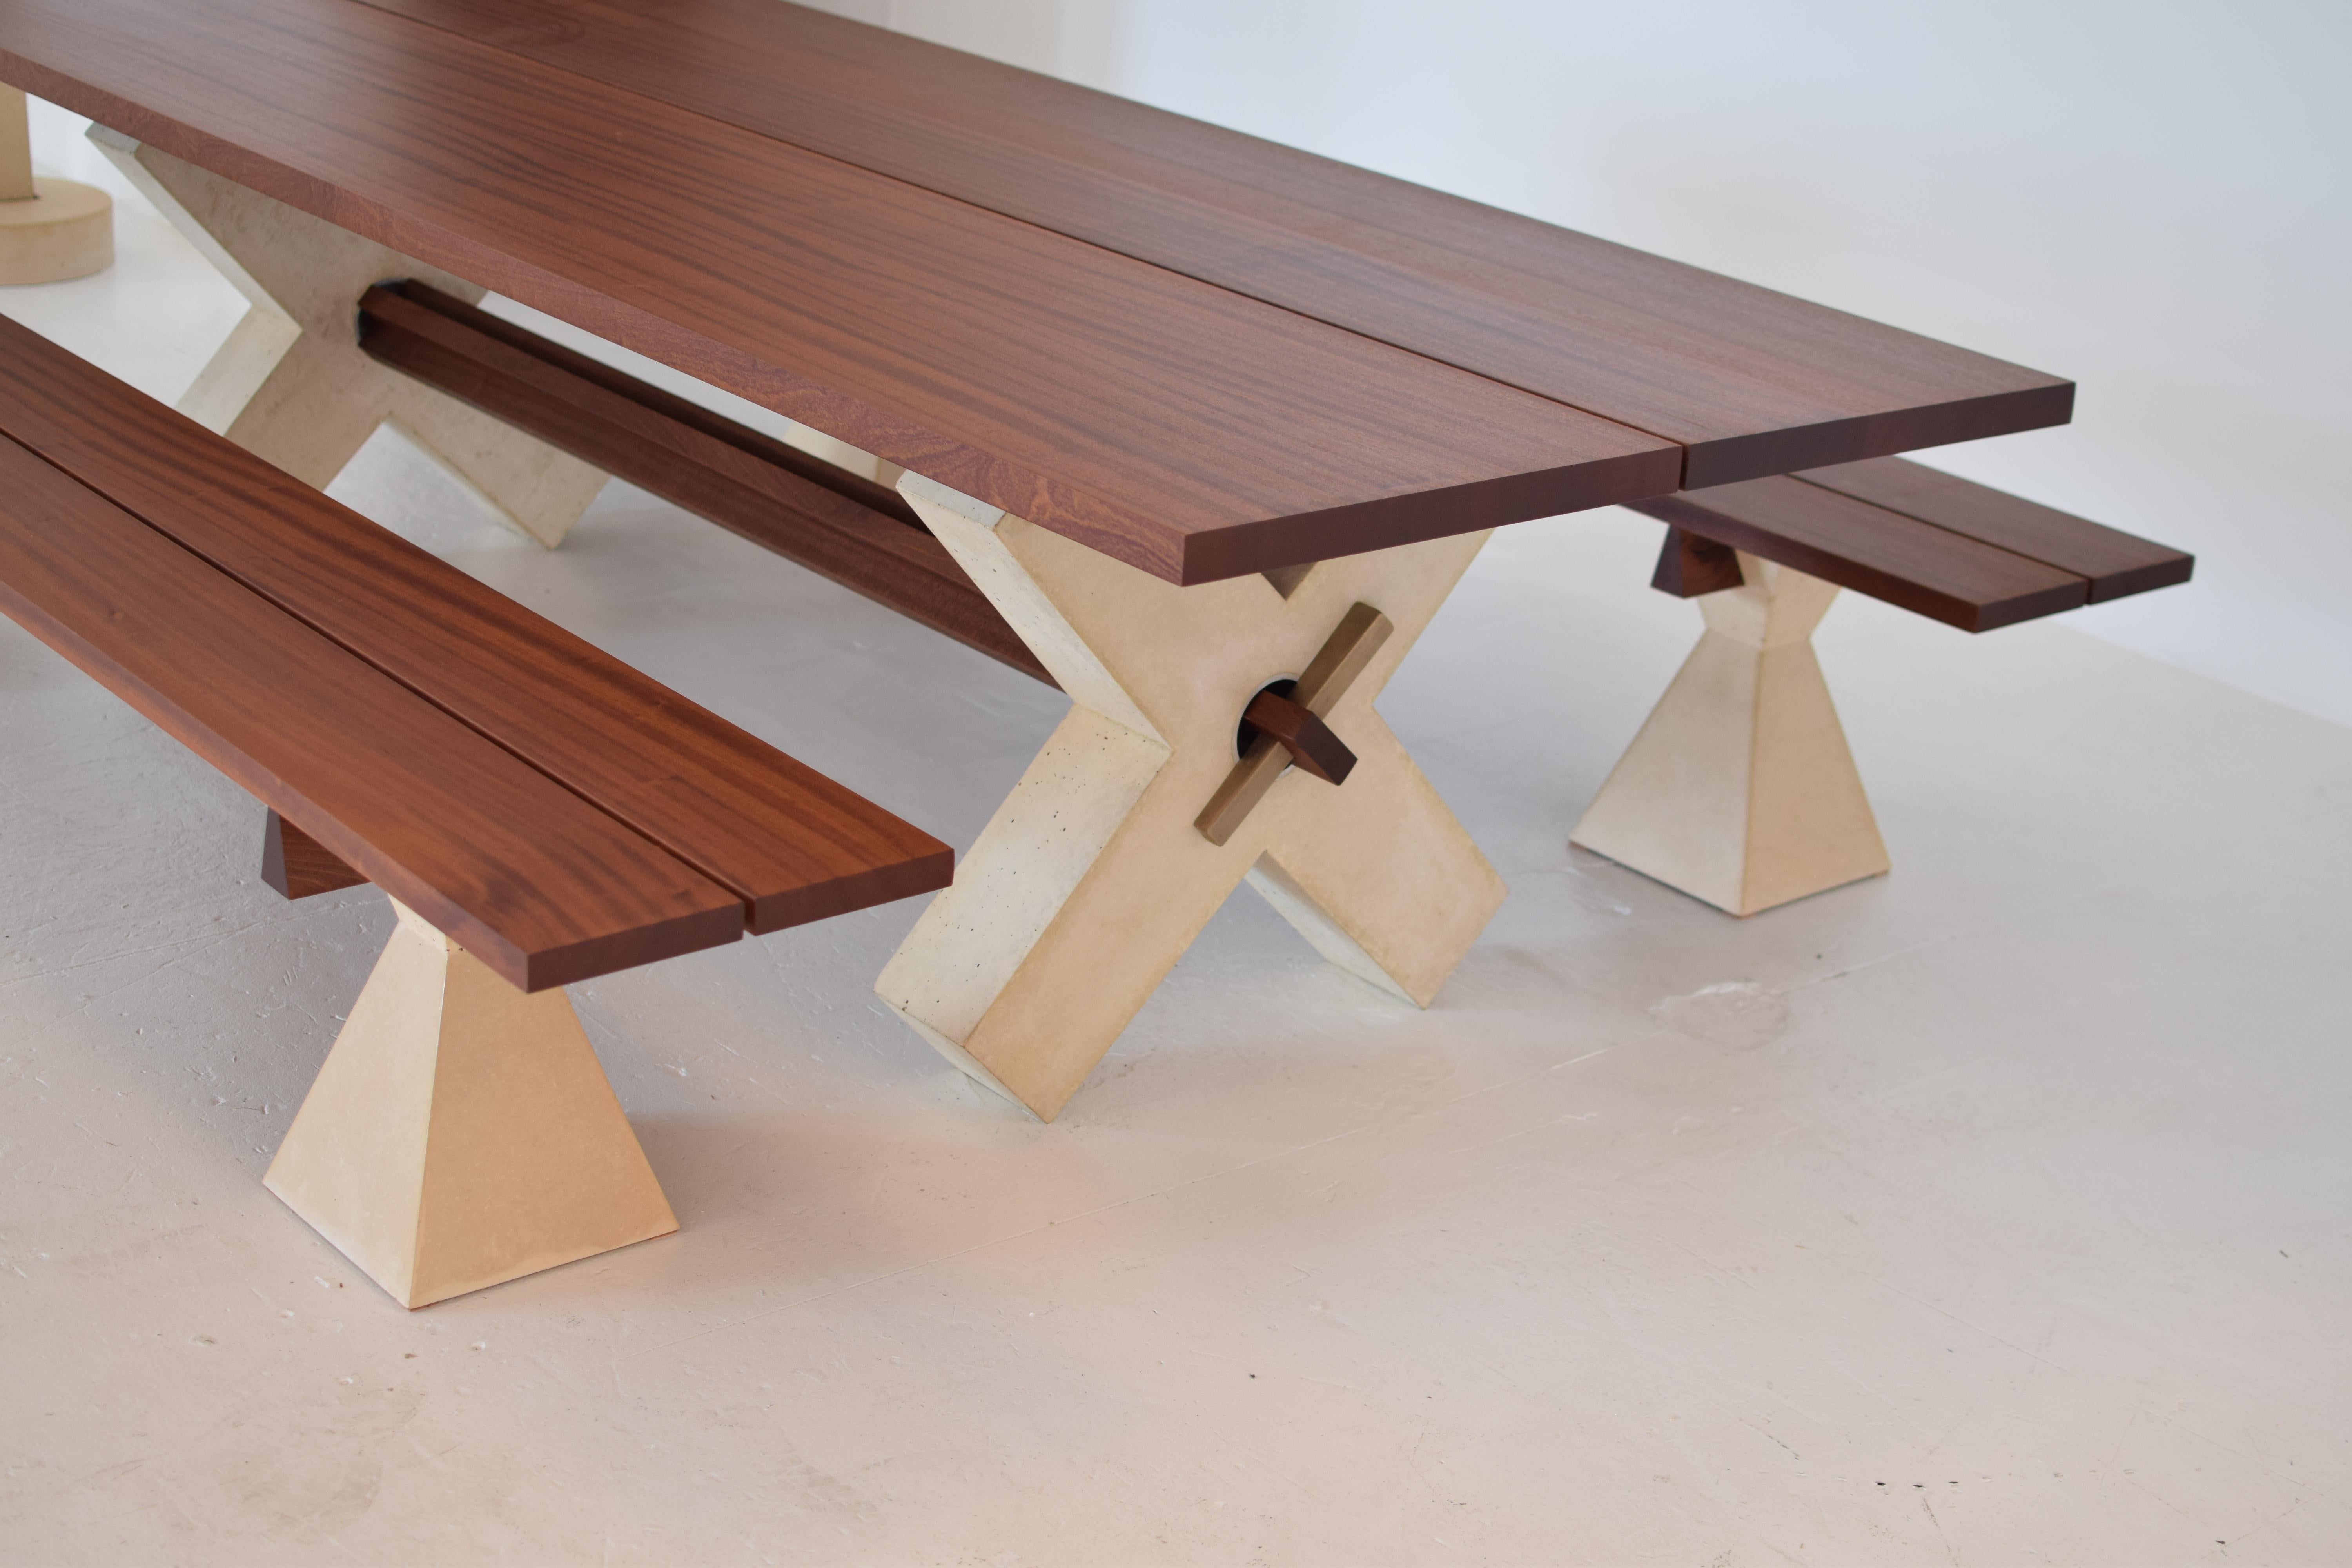 X dining table
This substantial wooden top and monument X-base make for a grand dining experience. Poux’s use of cast concrete commands attention, this time with the addition of his two-piece tabletop and wood trestle beam that connects the